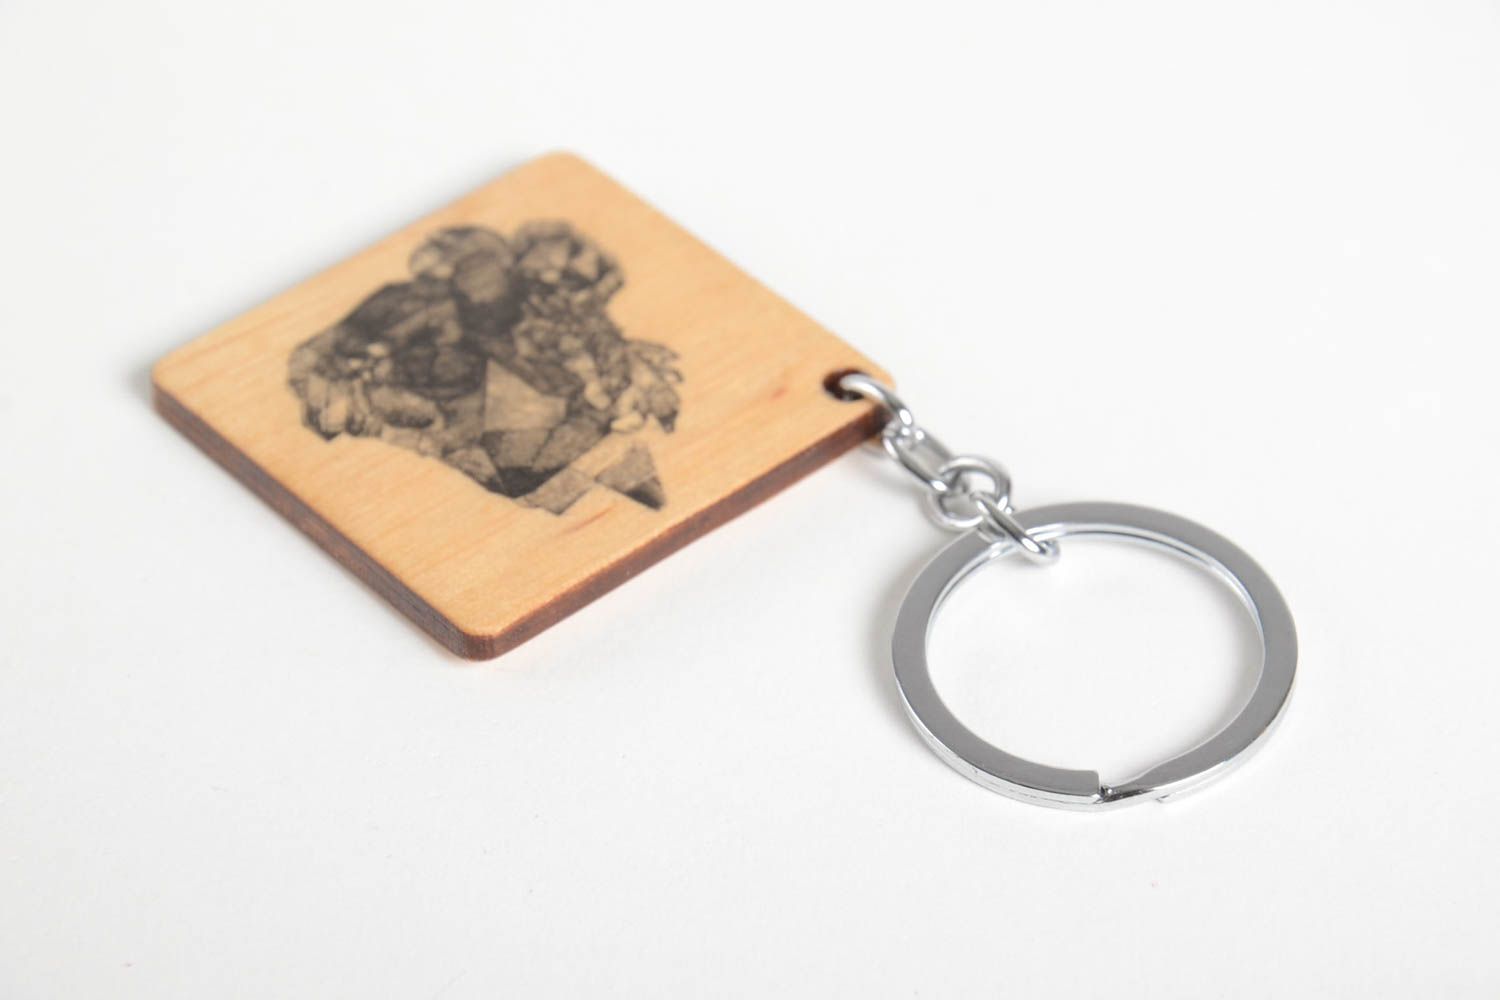 Designer keychain handmade wooden keyring key accessories gifts for guys photo 4